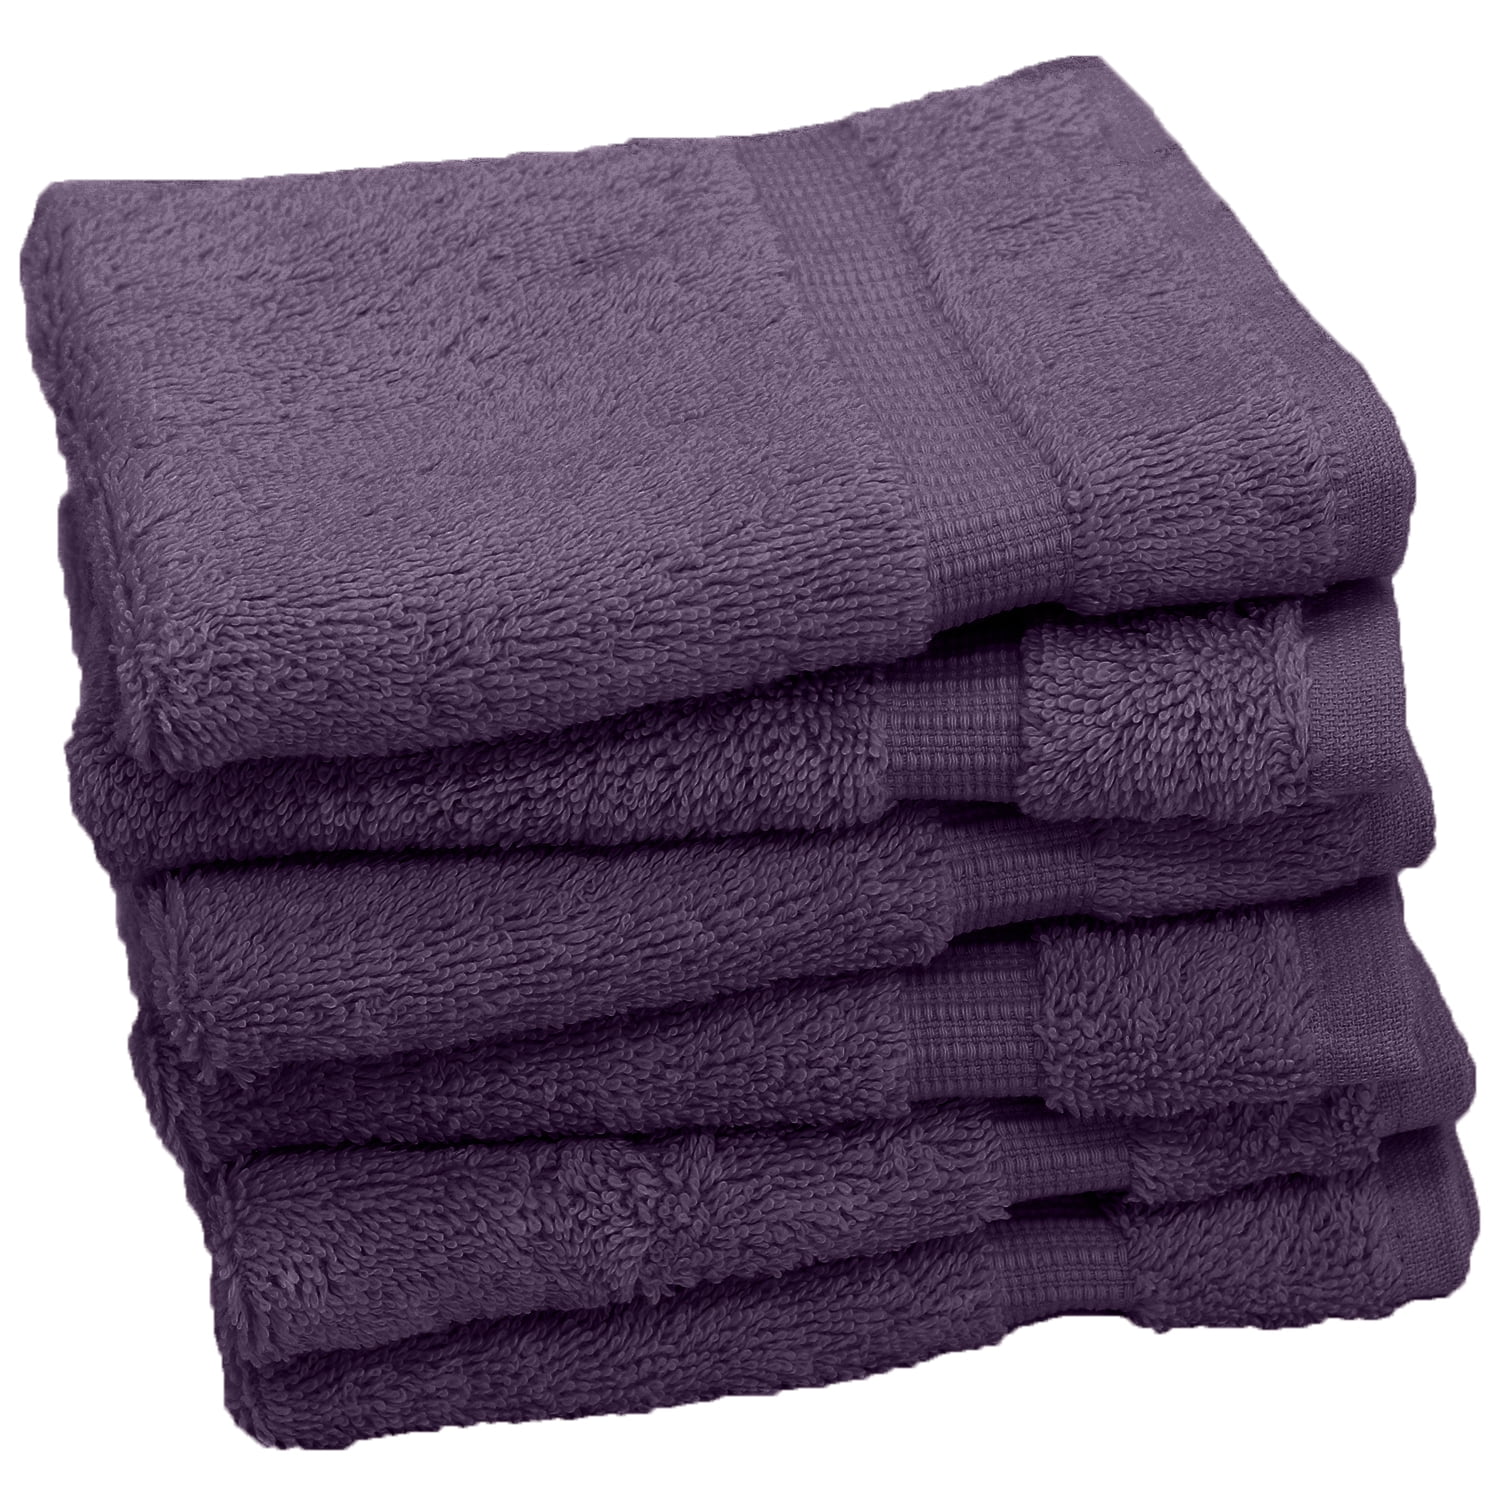  Mosobam 700 GSM Hotel Luxury Washcloths 13X13, Set of 8,  Charcoal Grey, Turkish Baby Bath Towel, Face Washcloth, Dark Gray, Viscose  Made from Bamboo - Turkish Cotton : Industrial & Scientific